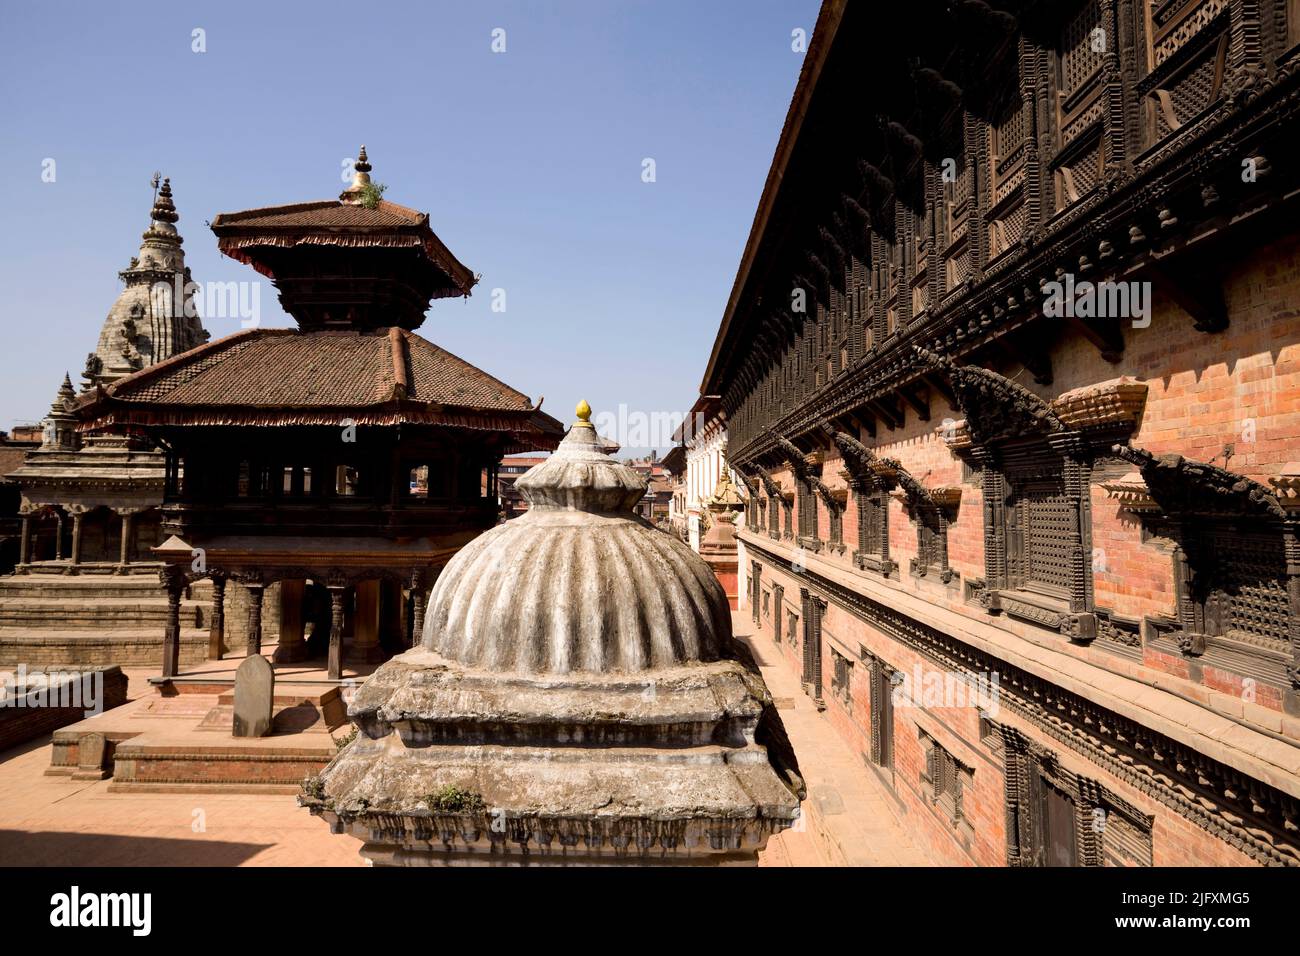 Bhaktapur is an ancient Newar town in the east corner of the Kathmandu Valley, Nepal. It is located in Bhaktapur District in the Bagmati Zone. Durbar Stock Photo